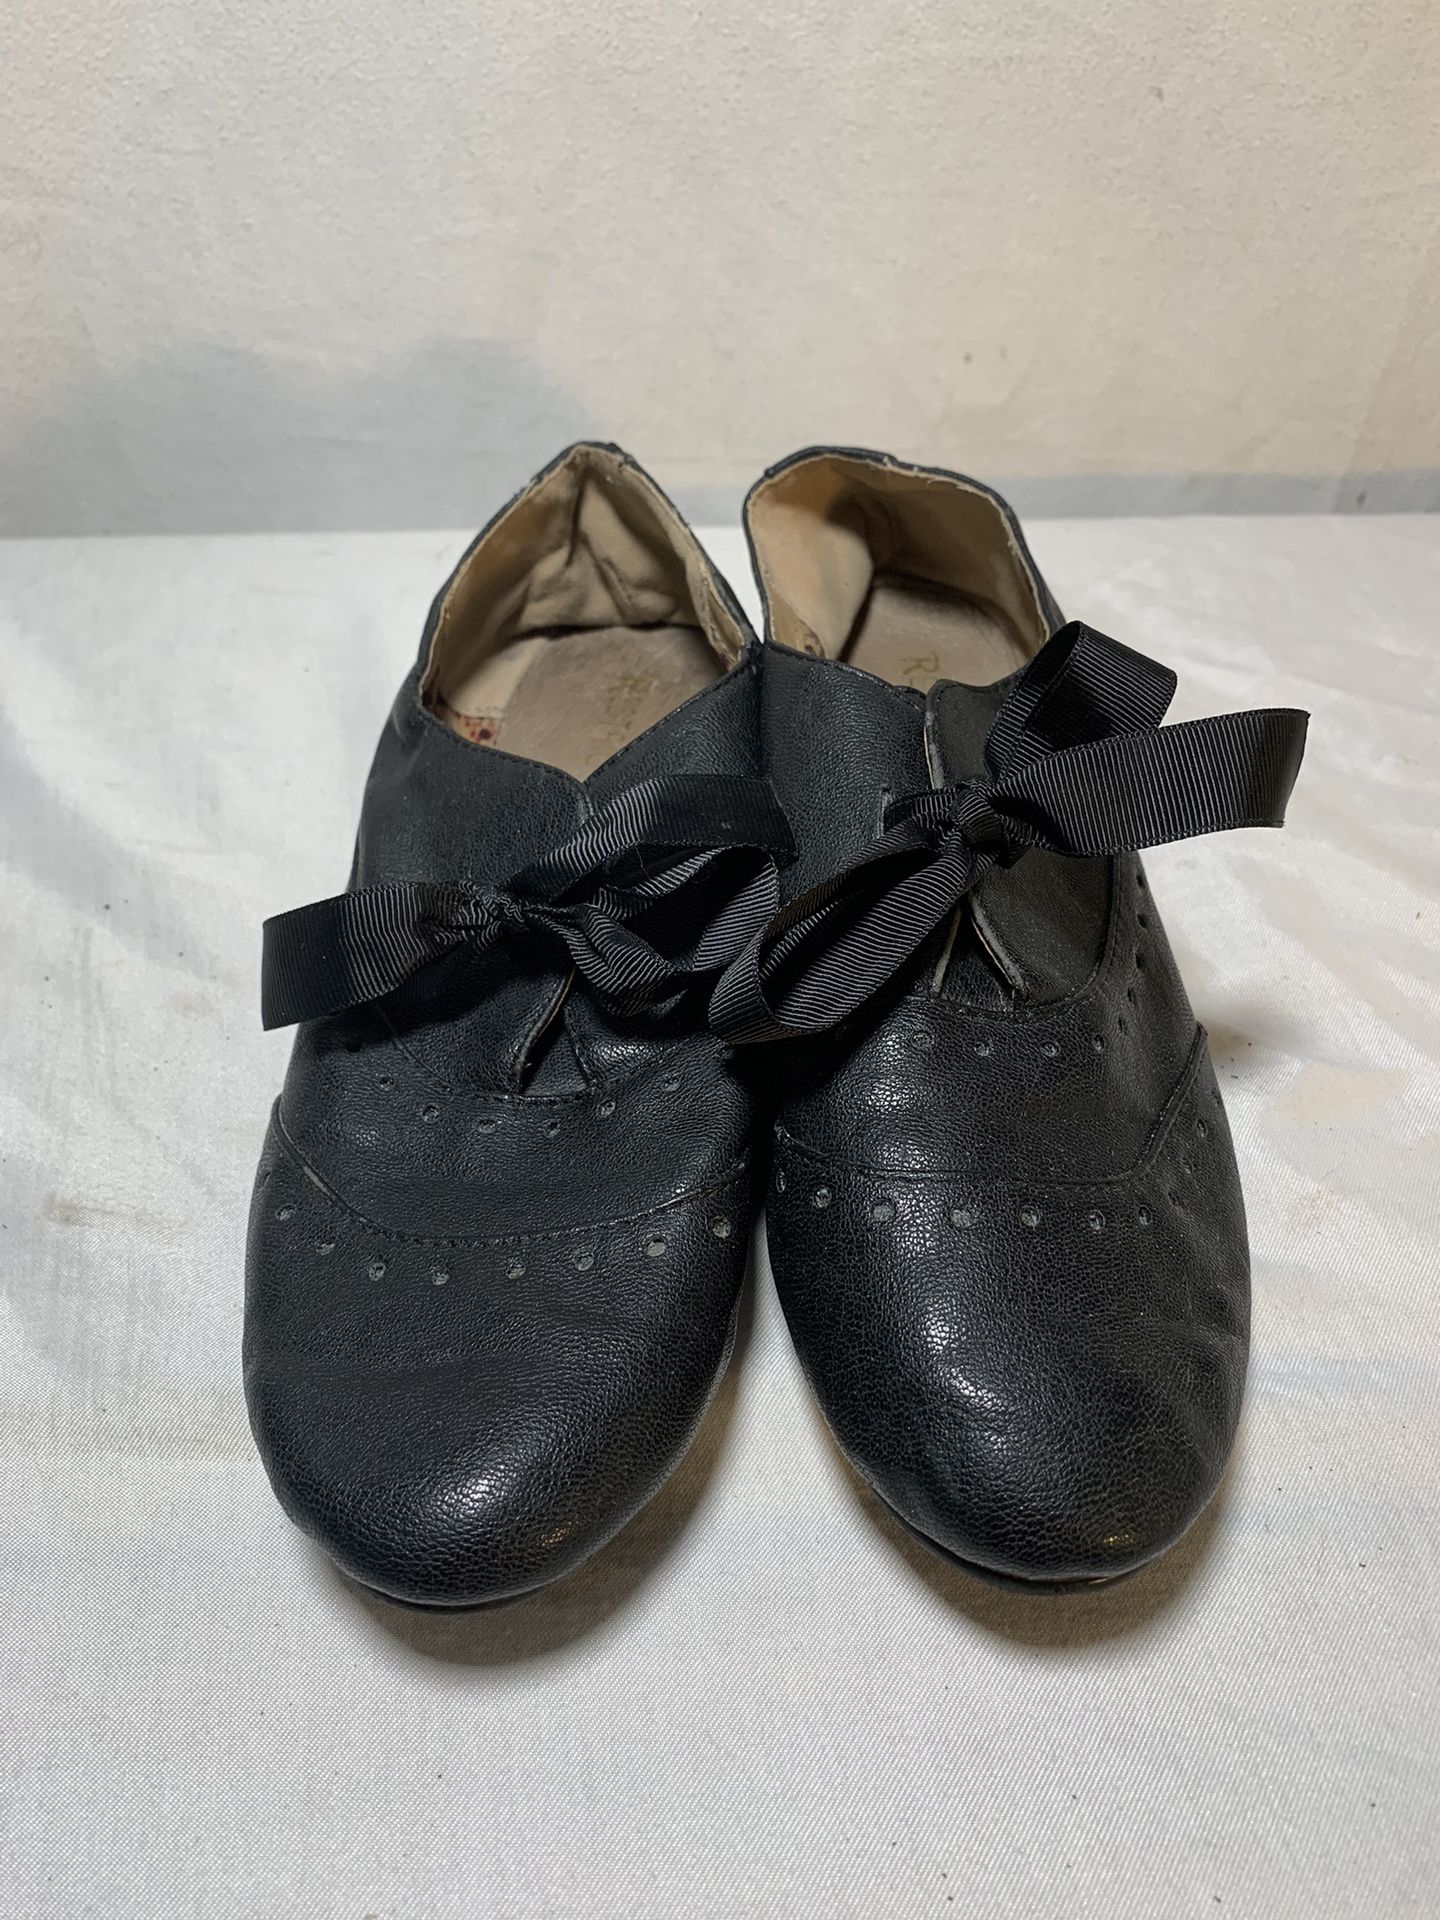 Restricted Roosevelt Tie Flats Size 8